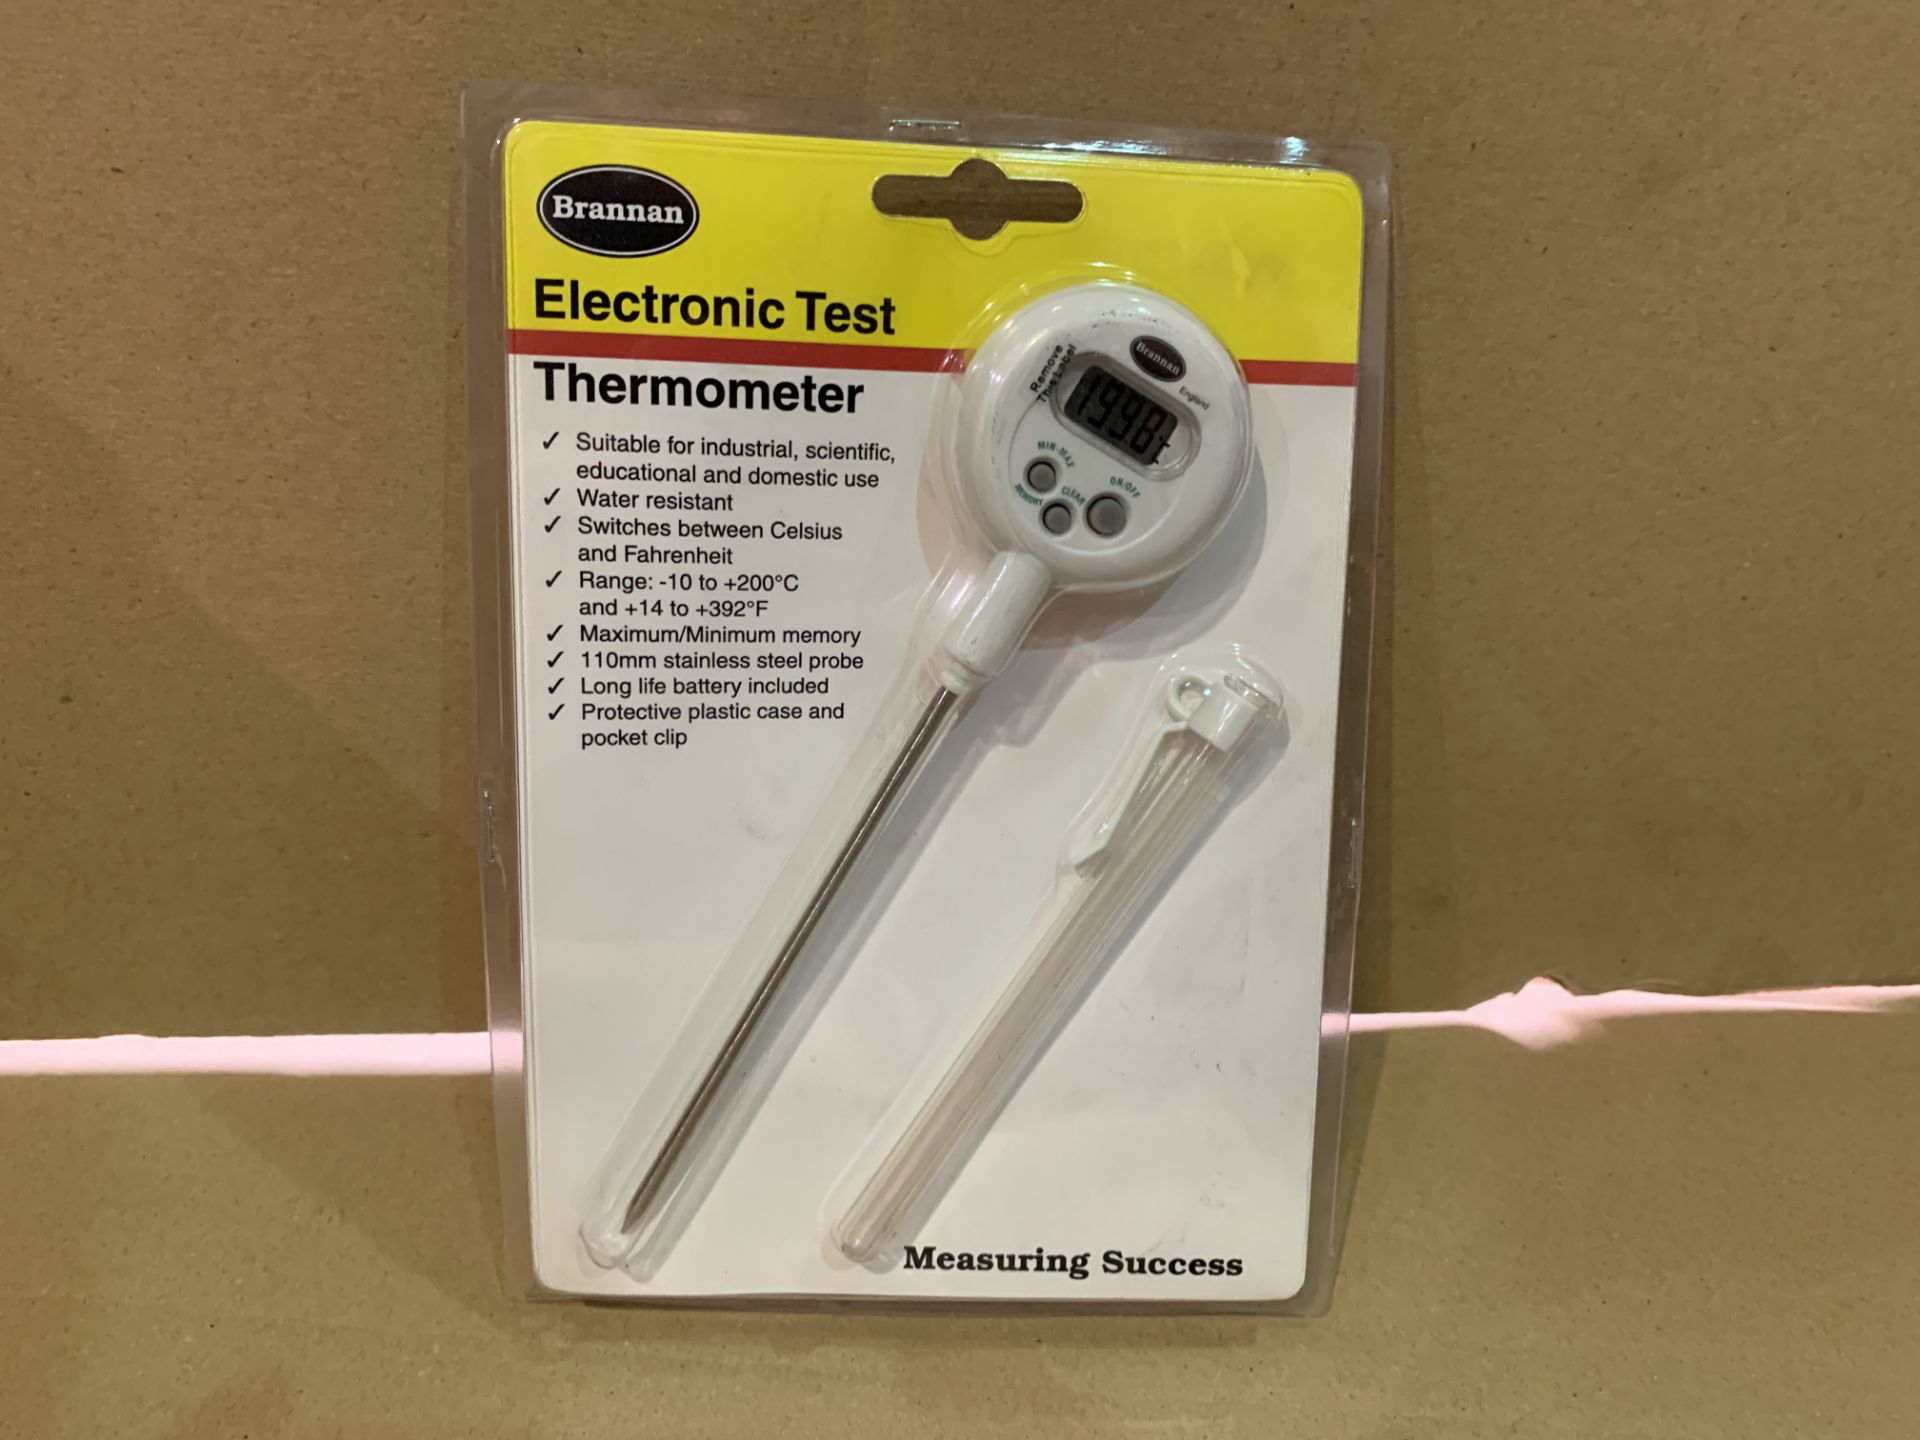 21 X BRAND NEW BRANNAN ELECTRONIC TEST THERMOMETERS RRP £16 EACH R15